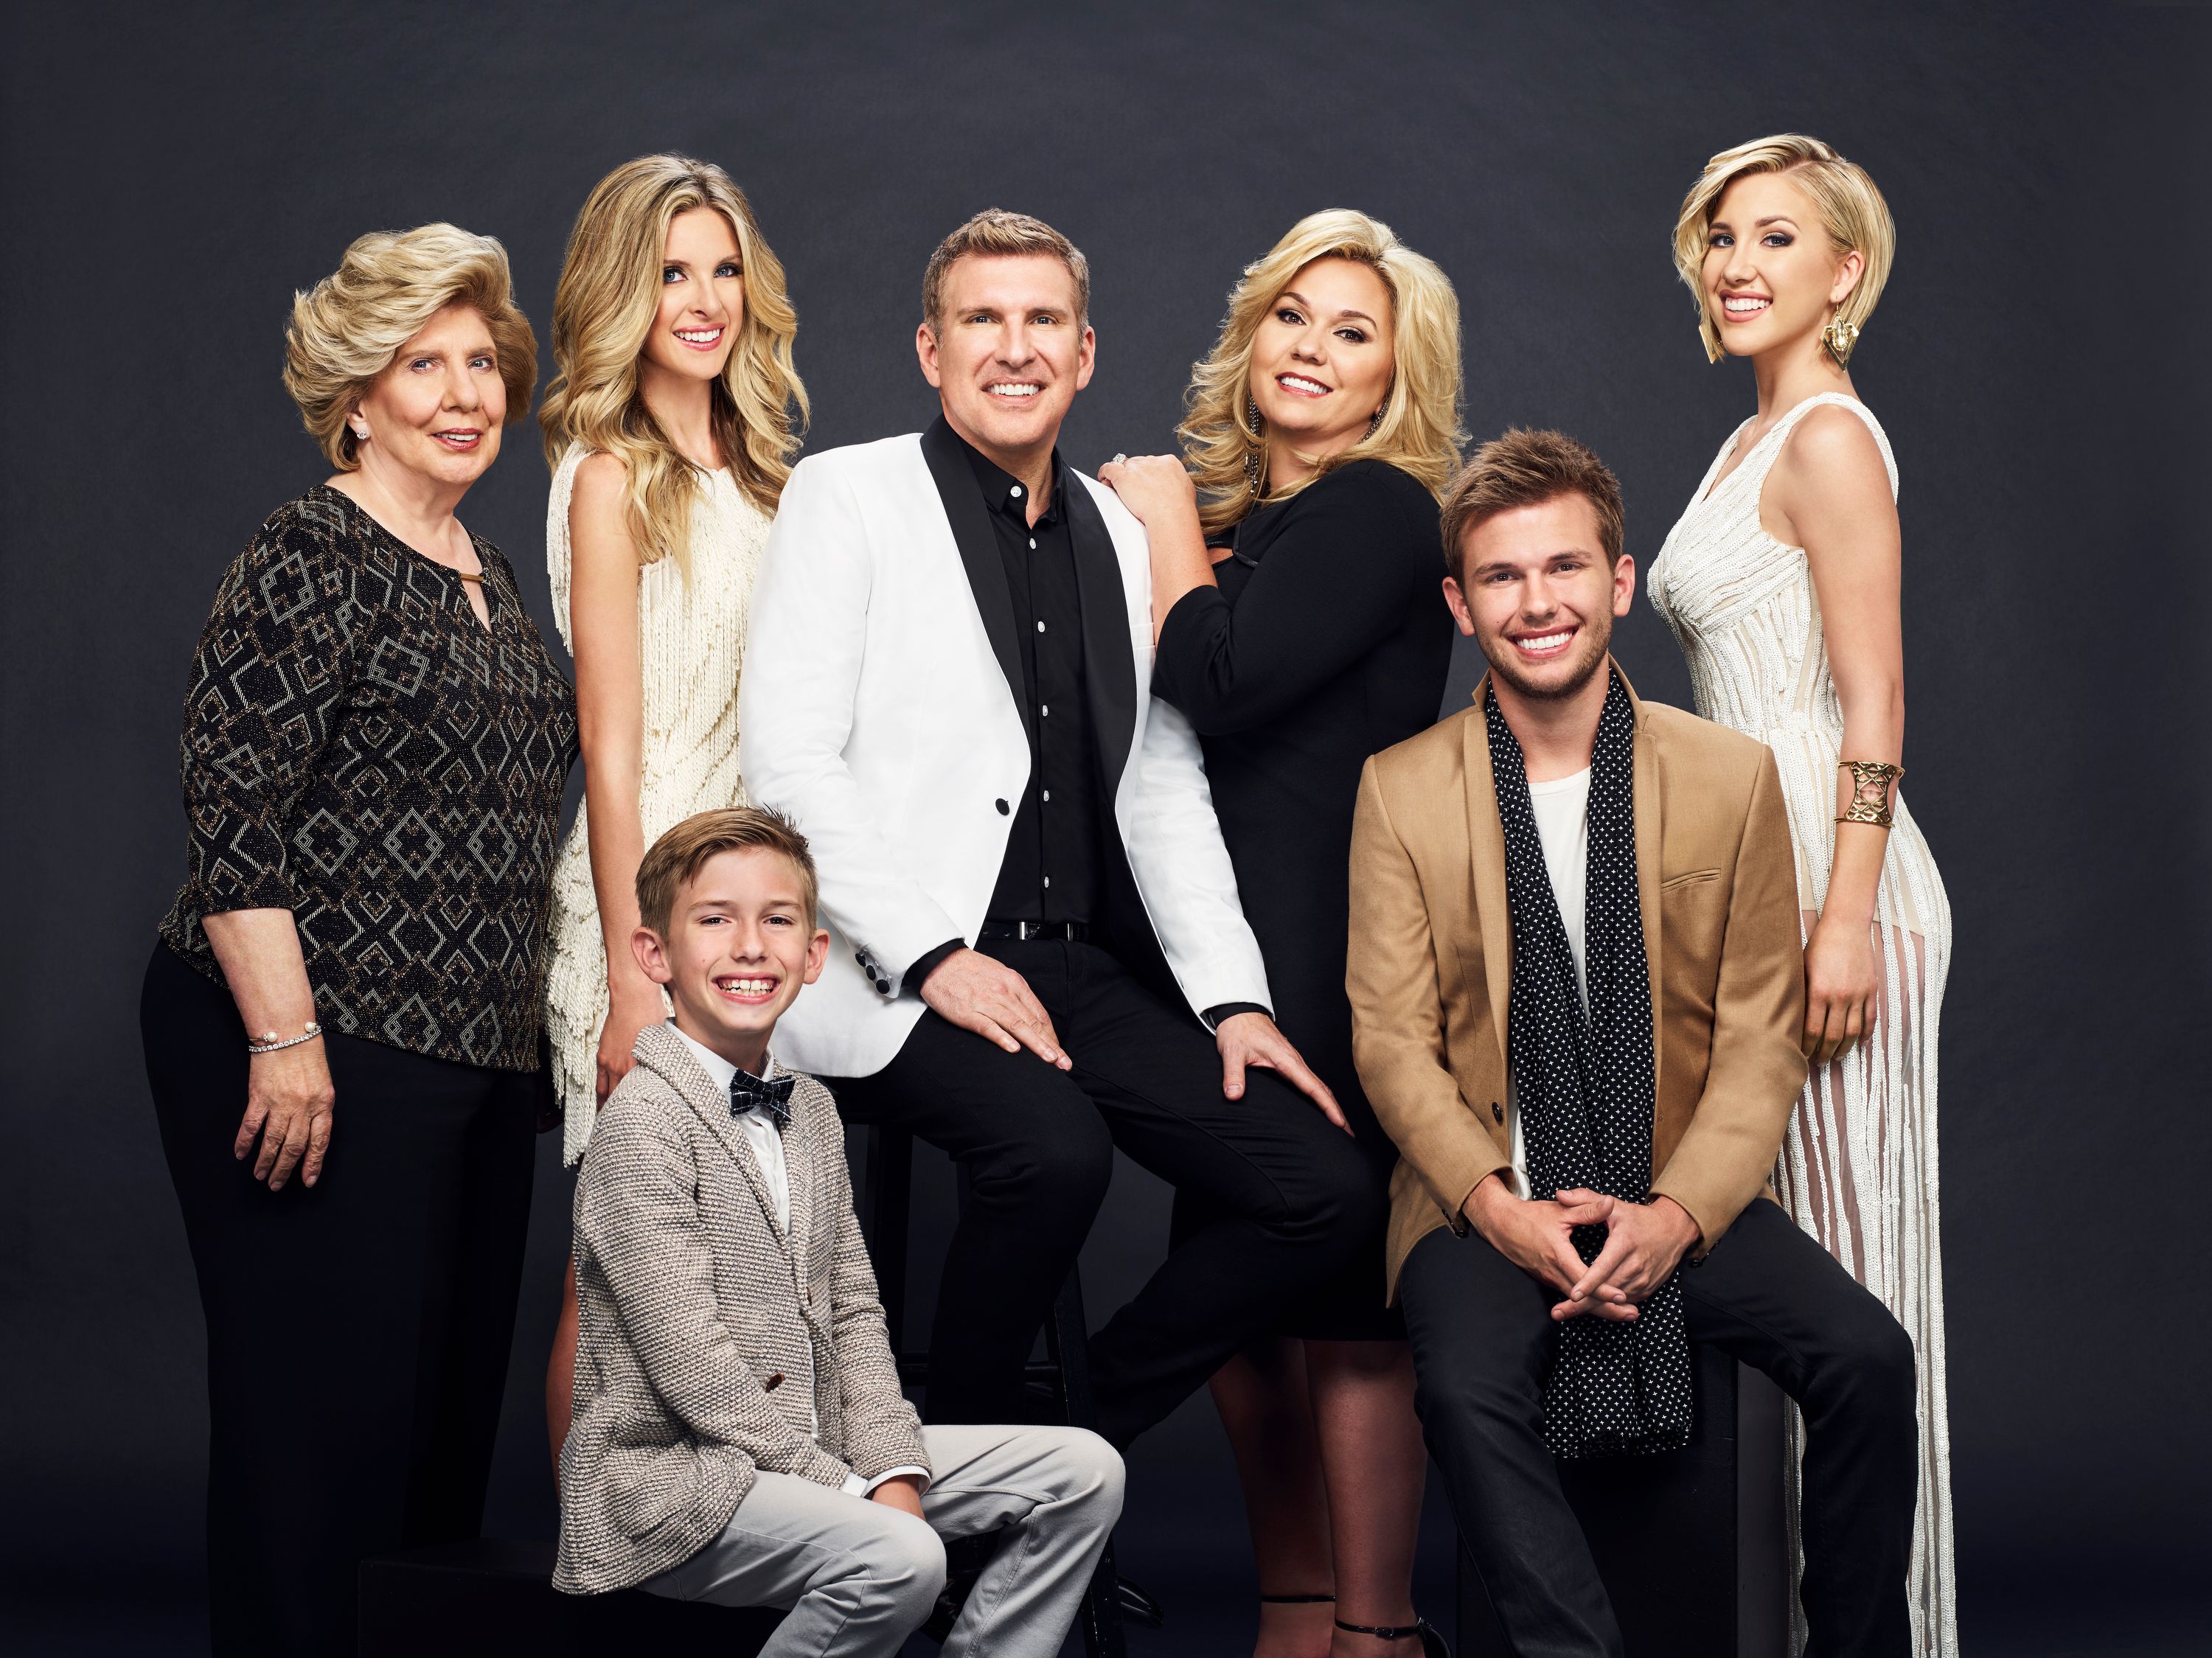 Faye Chrisley, Lindsie Chrisley Campbell, Grayson, Todd, Julie, Chase, and Savannah Chrisley on March 17, 2016 | Photo: Getty Images